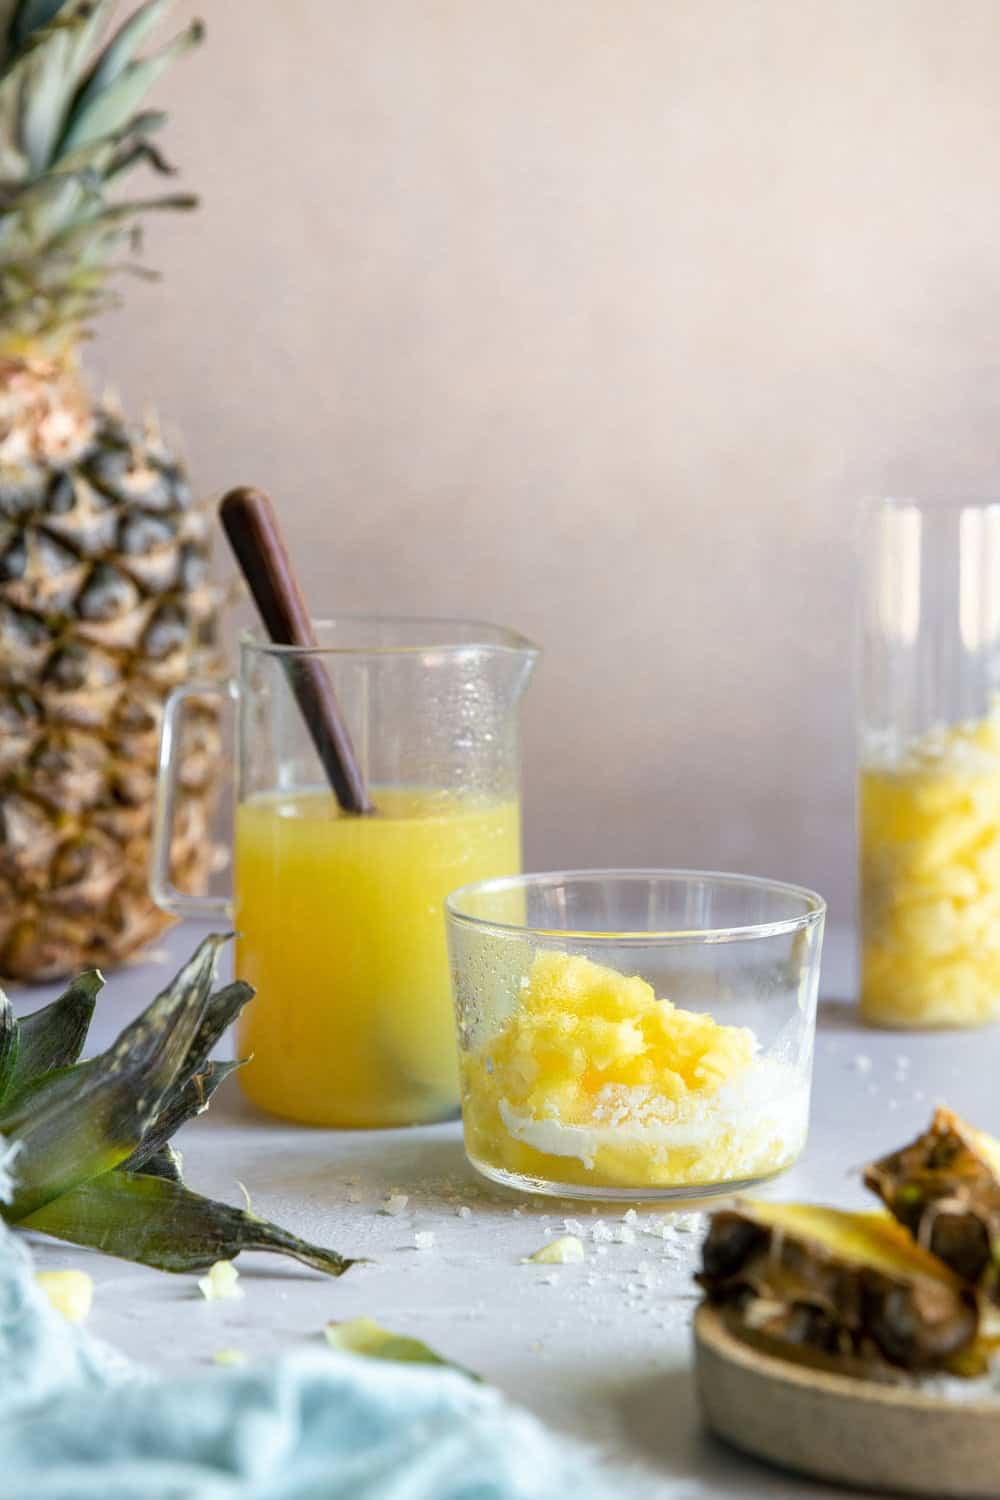 10 Pineapple Face Mask Recipes